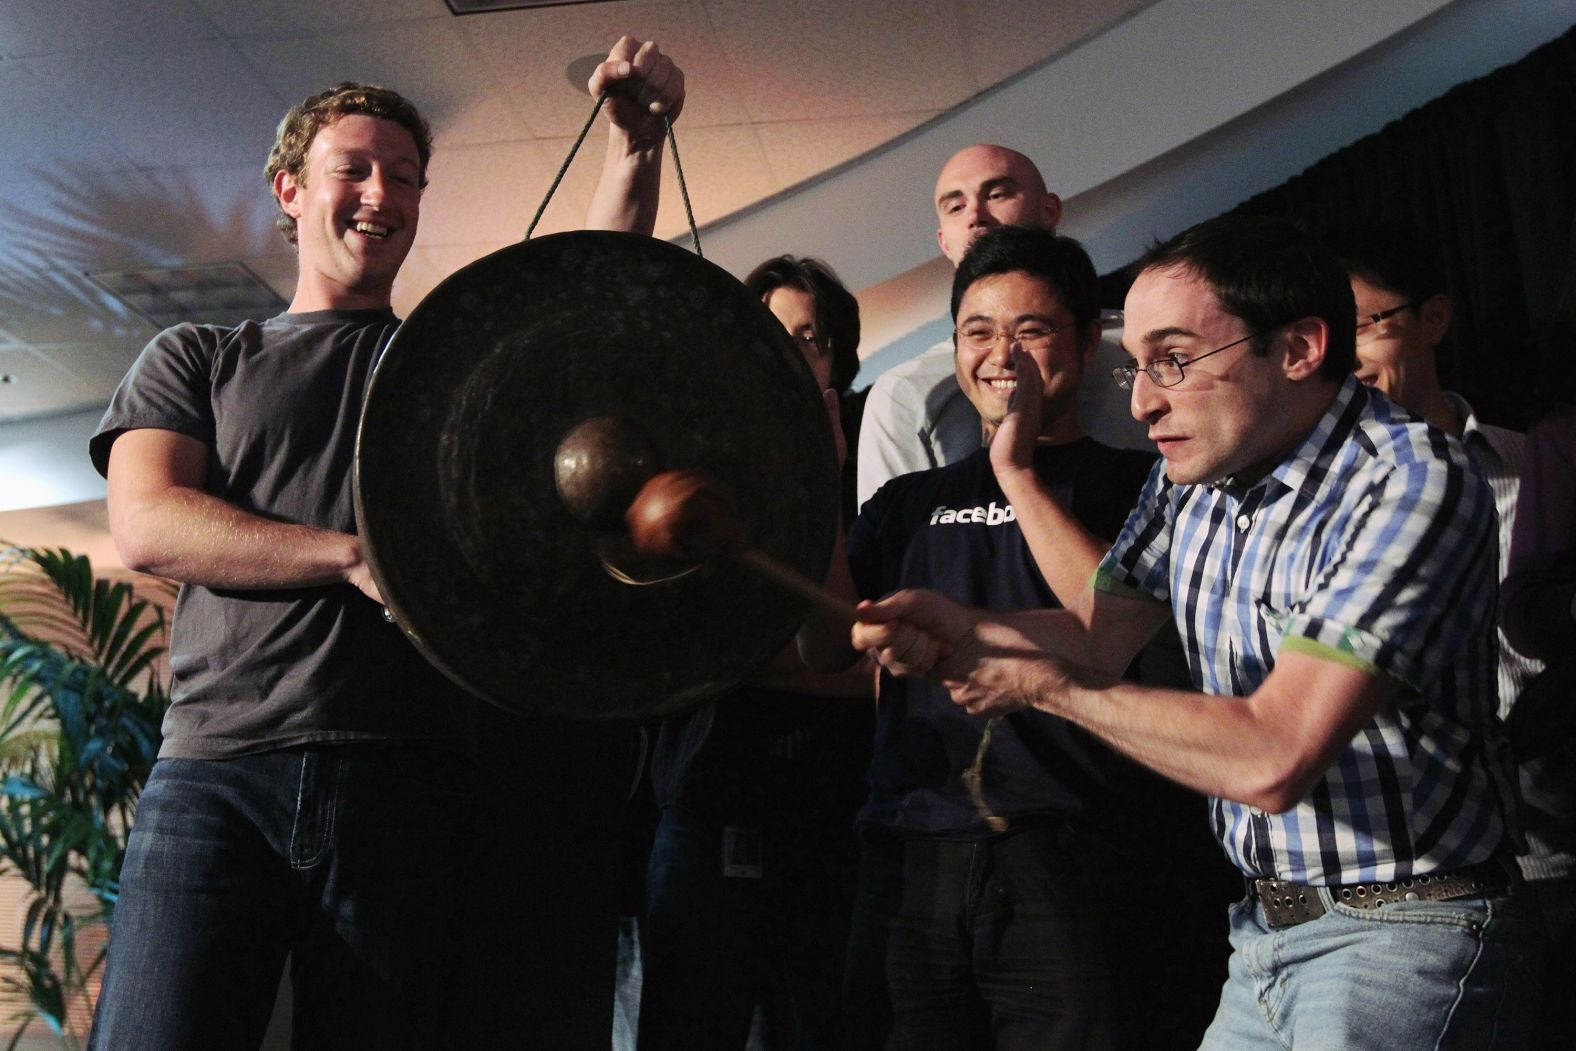 Zuckerberg watches Facebook employee Ben Gertzfield strike a ceremonial gong, used when a new product is launched, during a news conference at Facebook headquarters in August 2010. Zuckerberg was announcing the launch of Facebook Places, an application that allows Facebook users to document places they have visited.